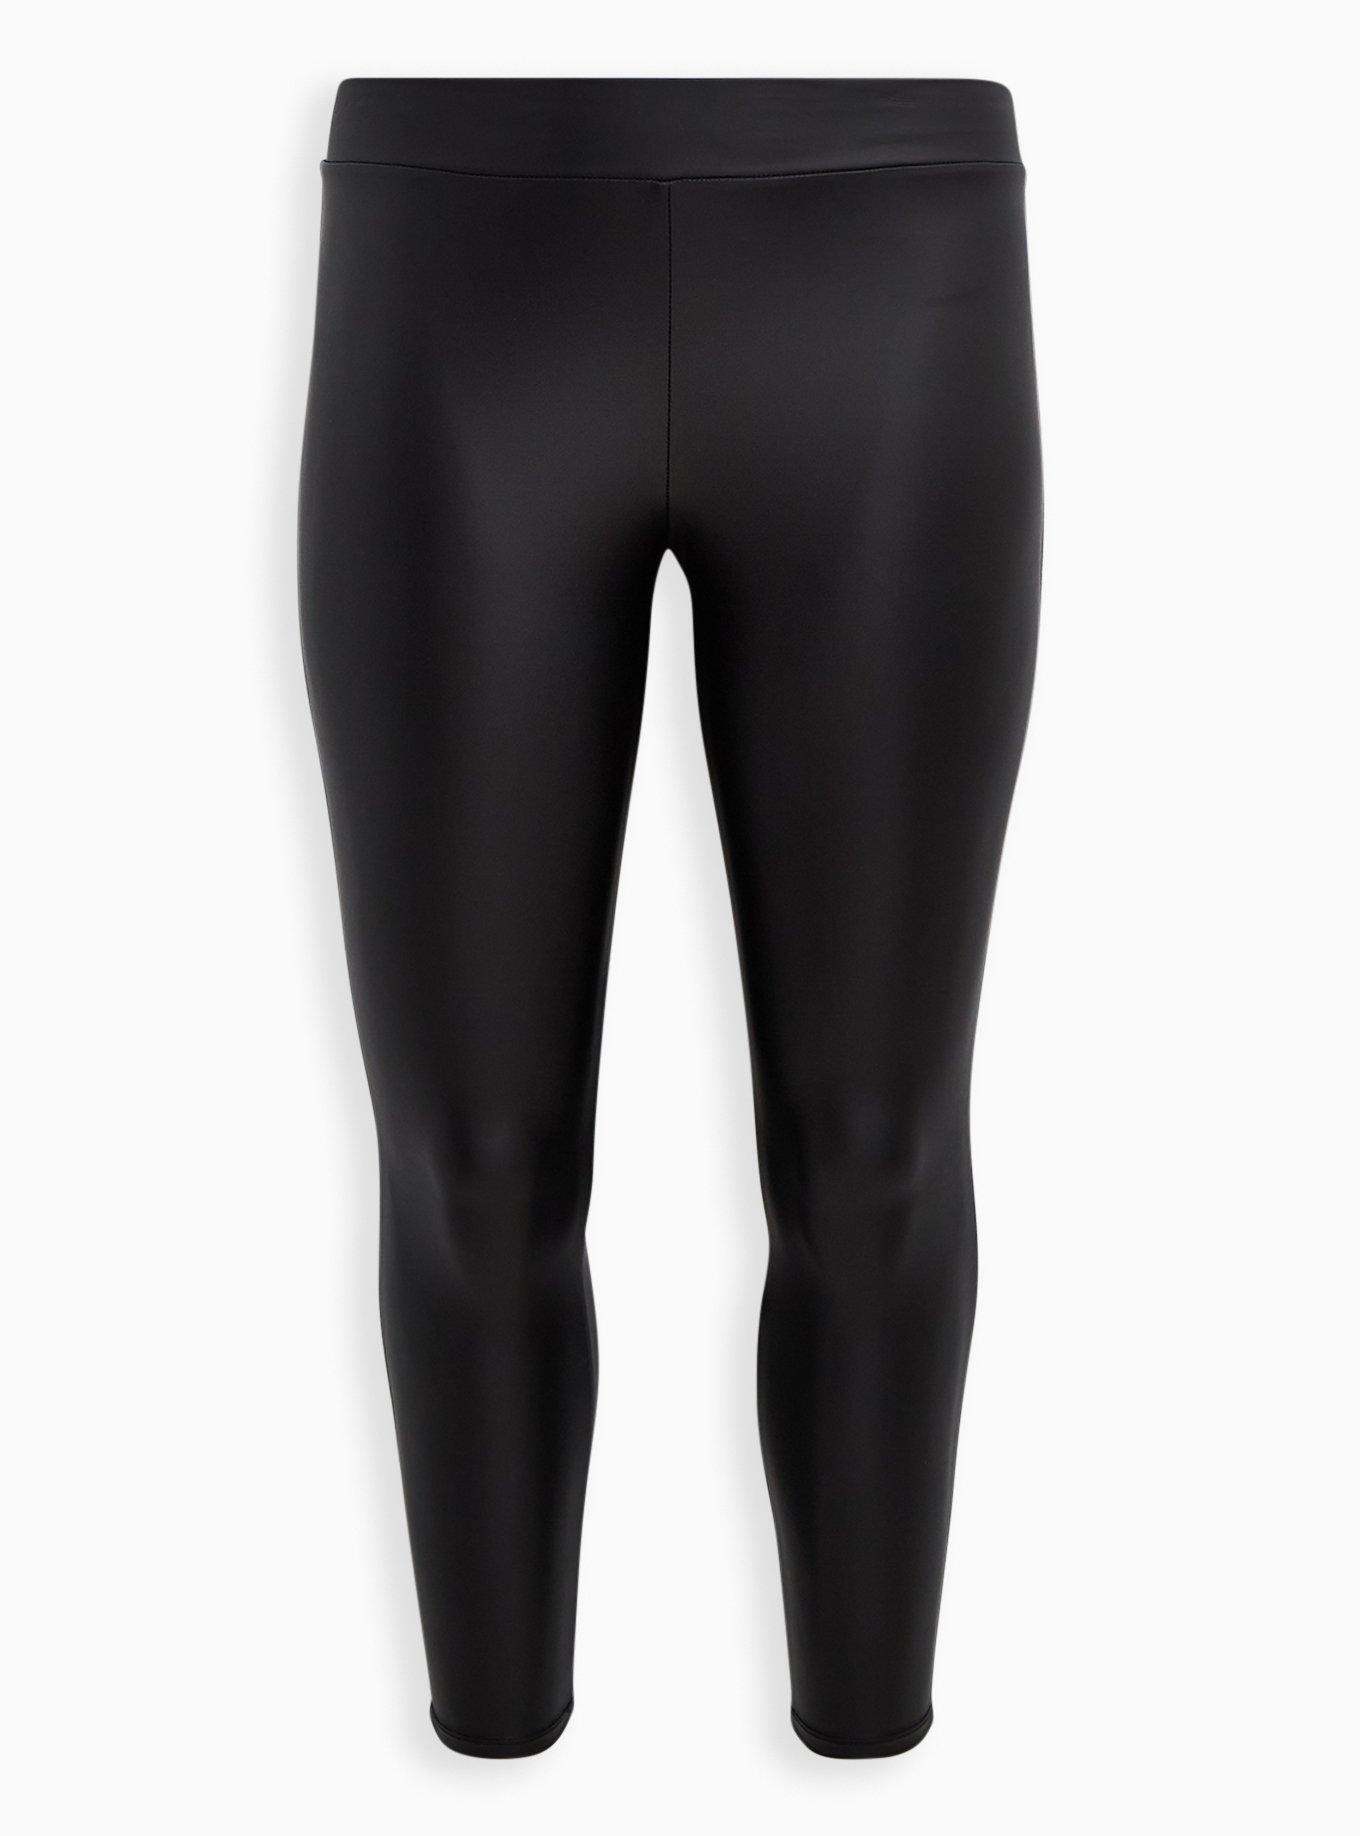 Cool Wholesale shiny leather leggings In Any Size And Style